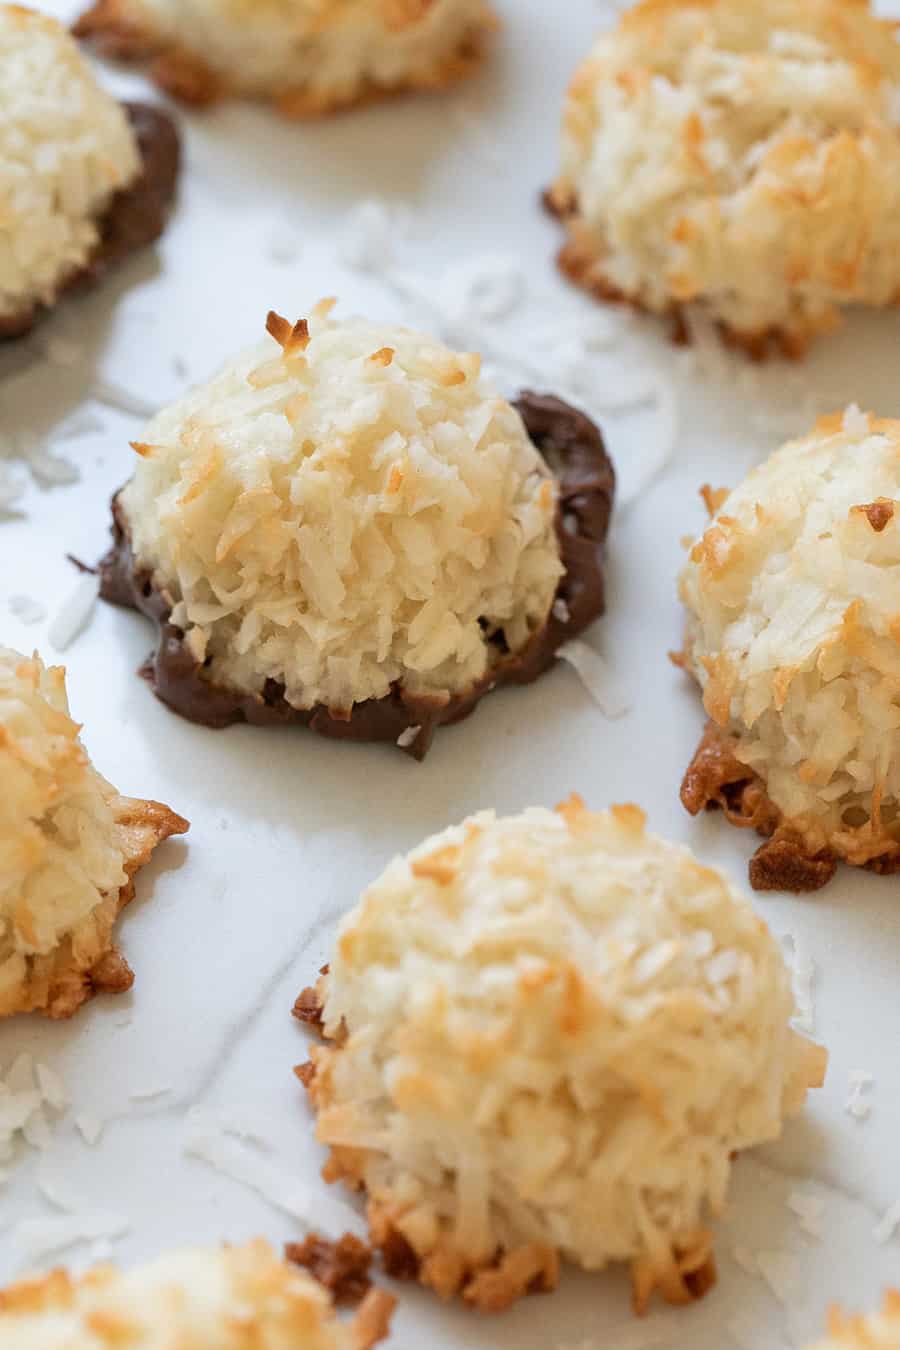 Coconut macaroons dipped in chocolate 